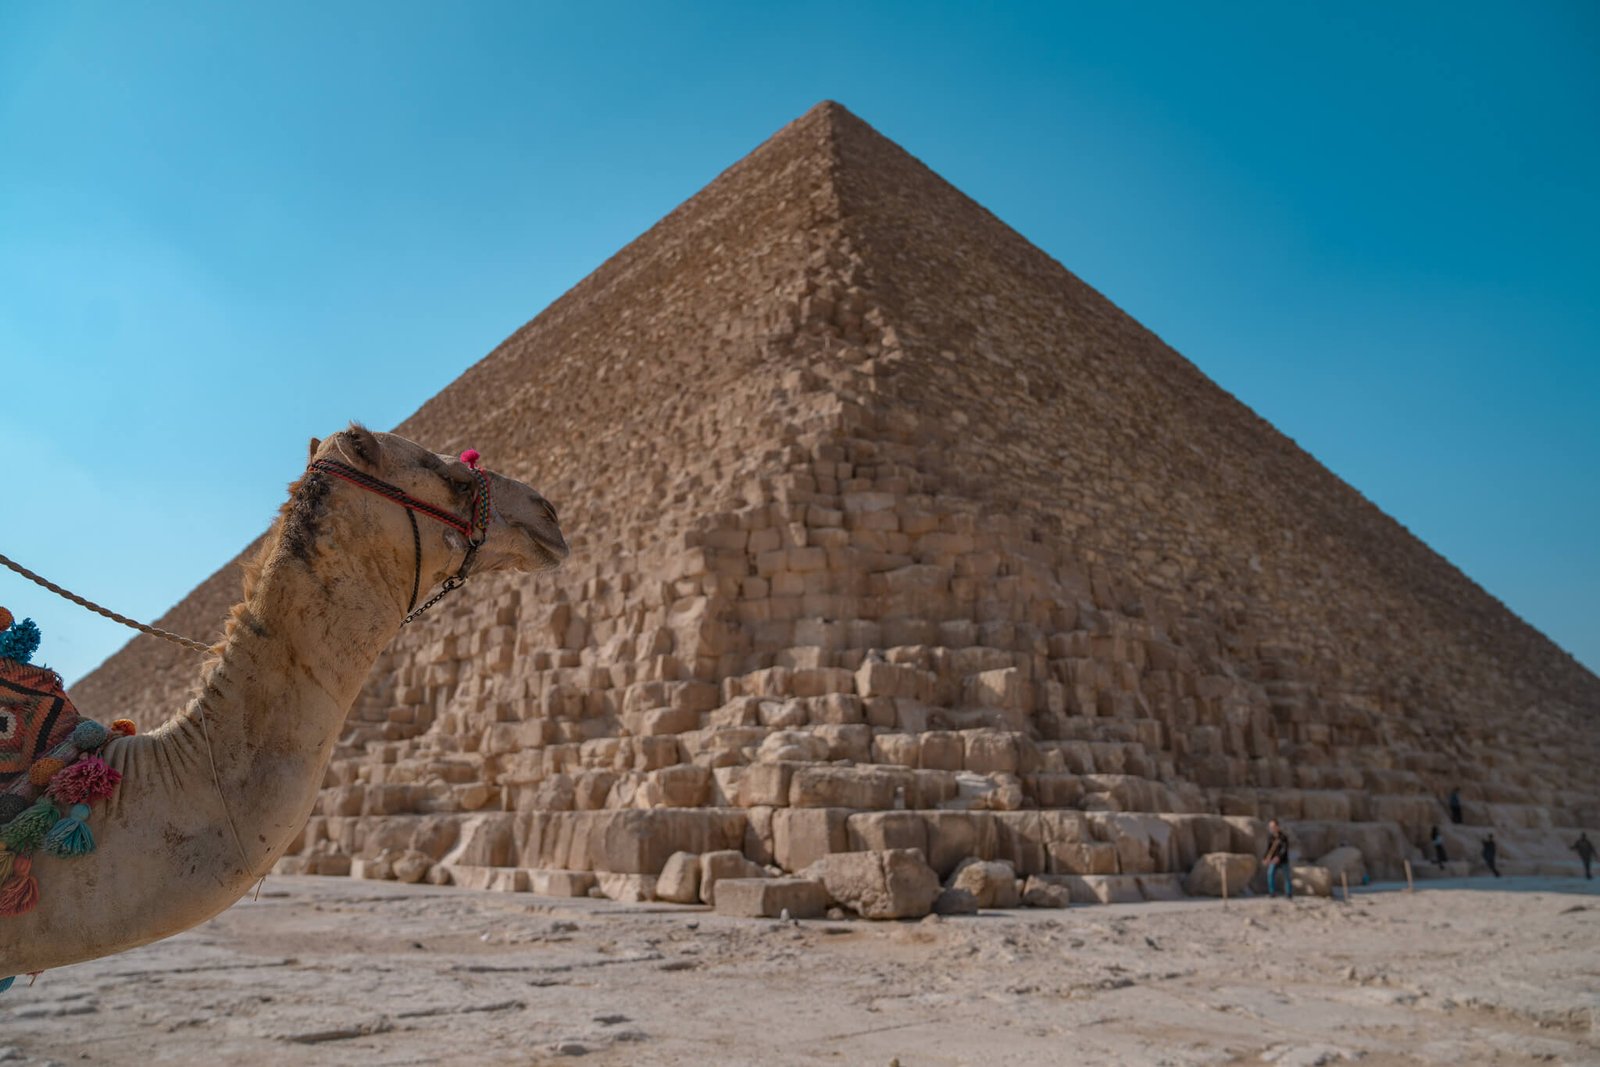 camel photobomb at the pyramids of Giza in Egypt